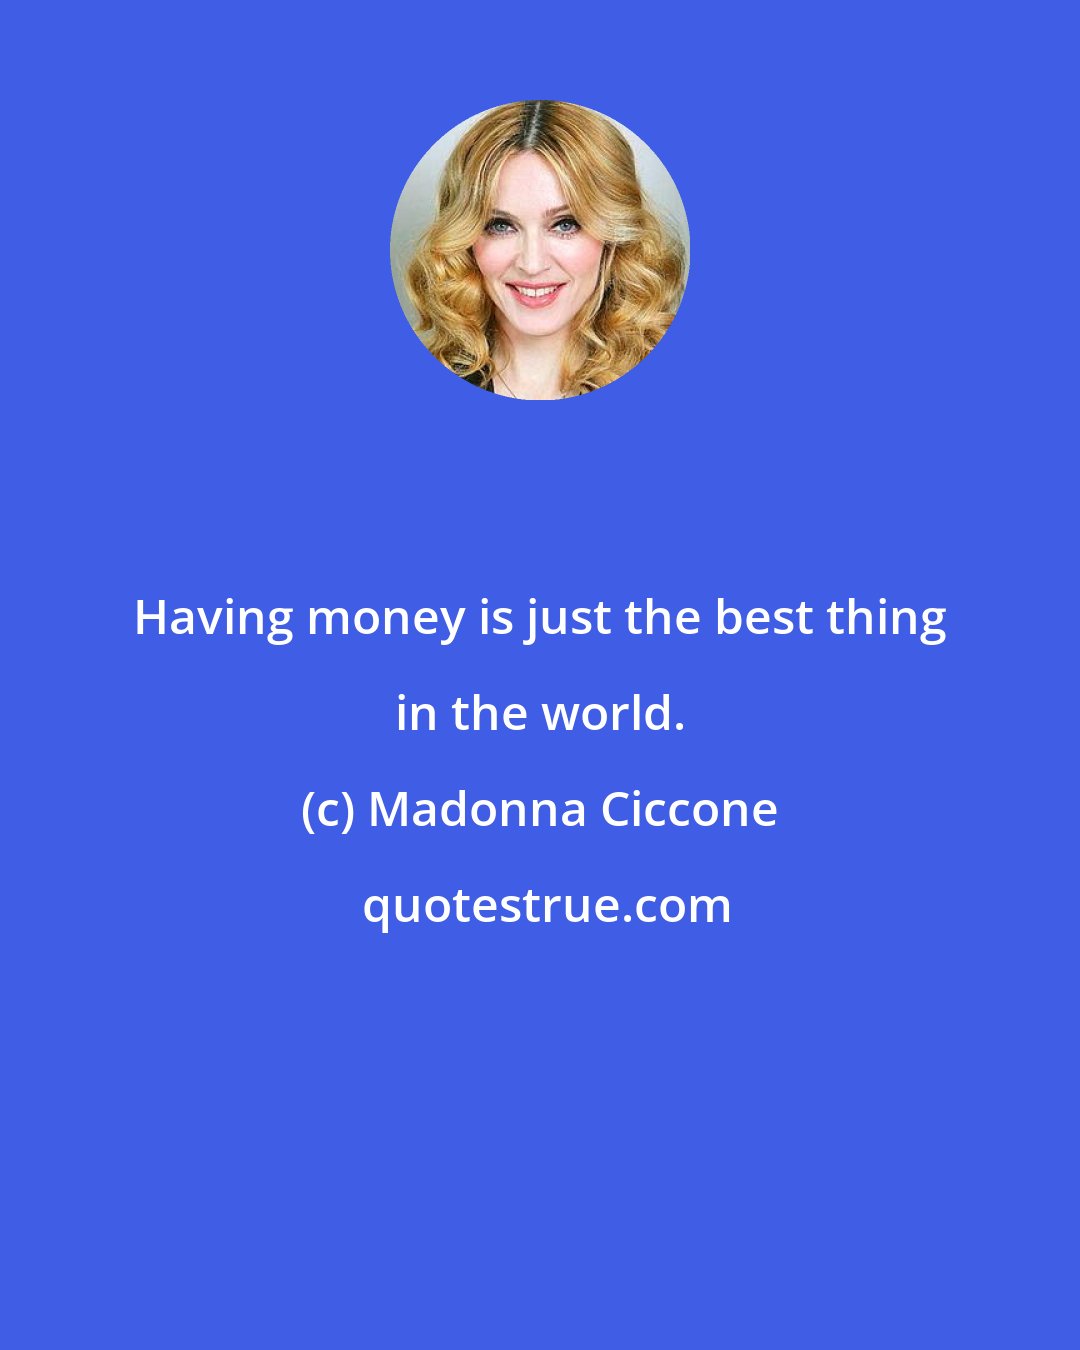 Madonna Ciccone: Having money is just the best thing in the world.